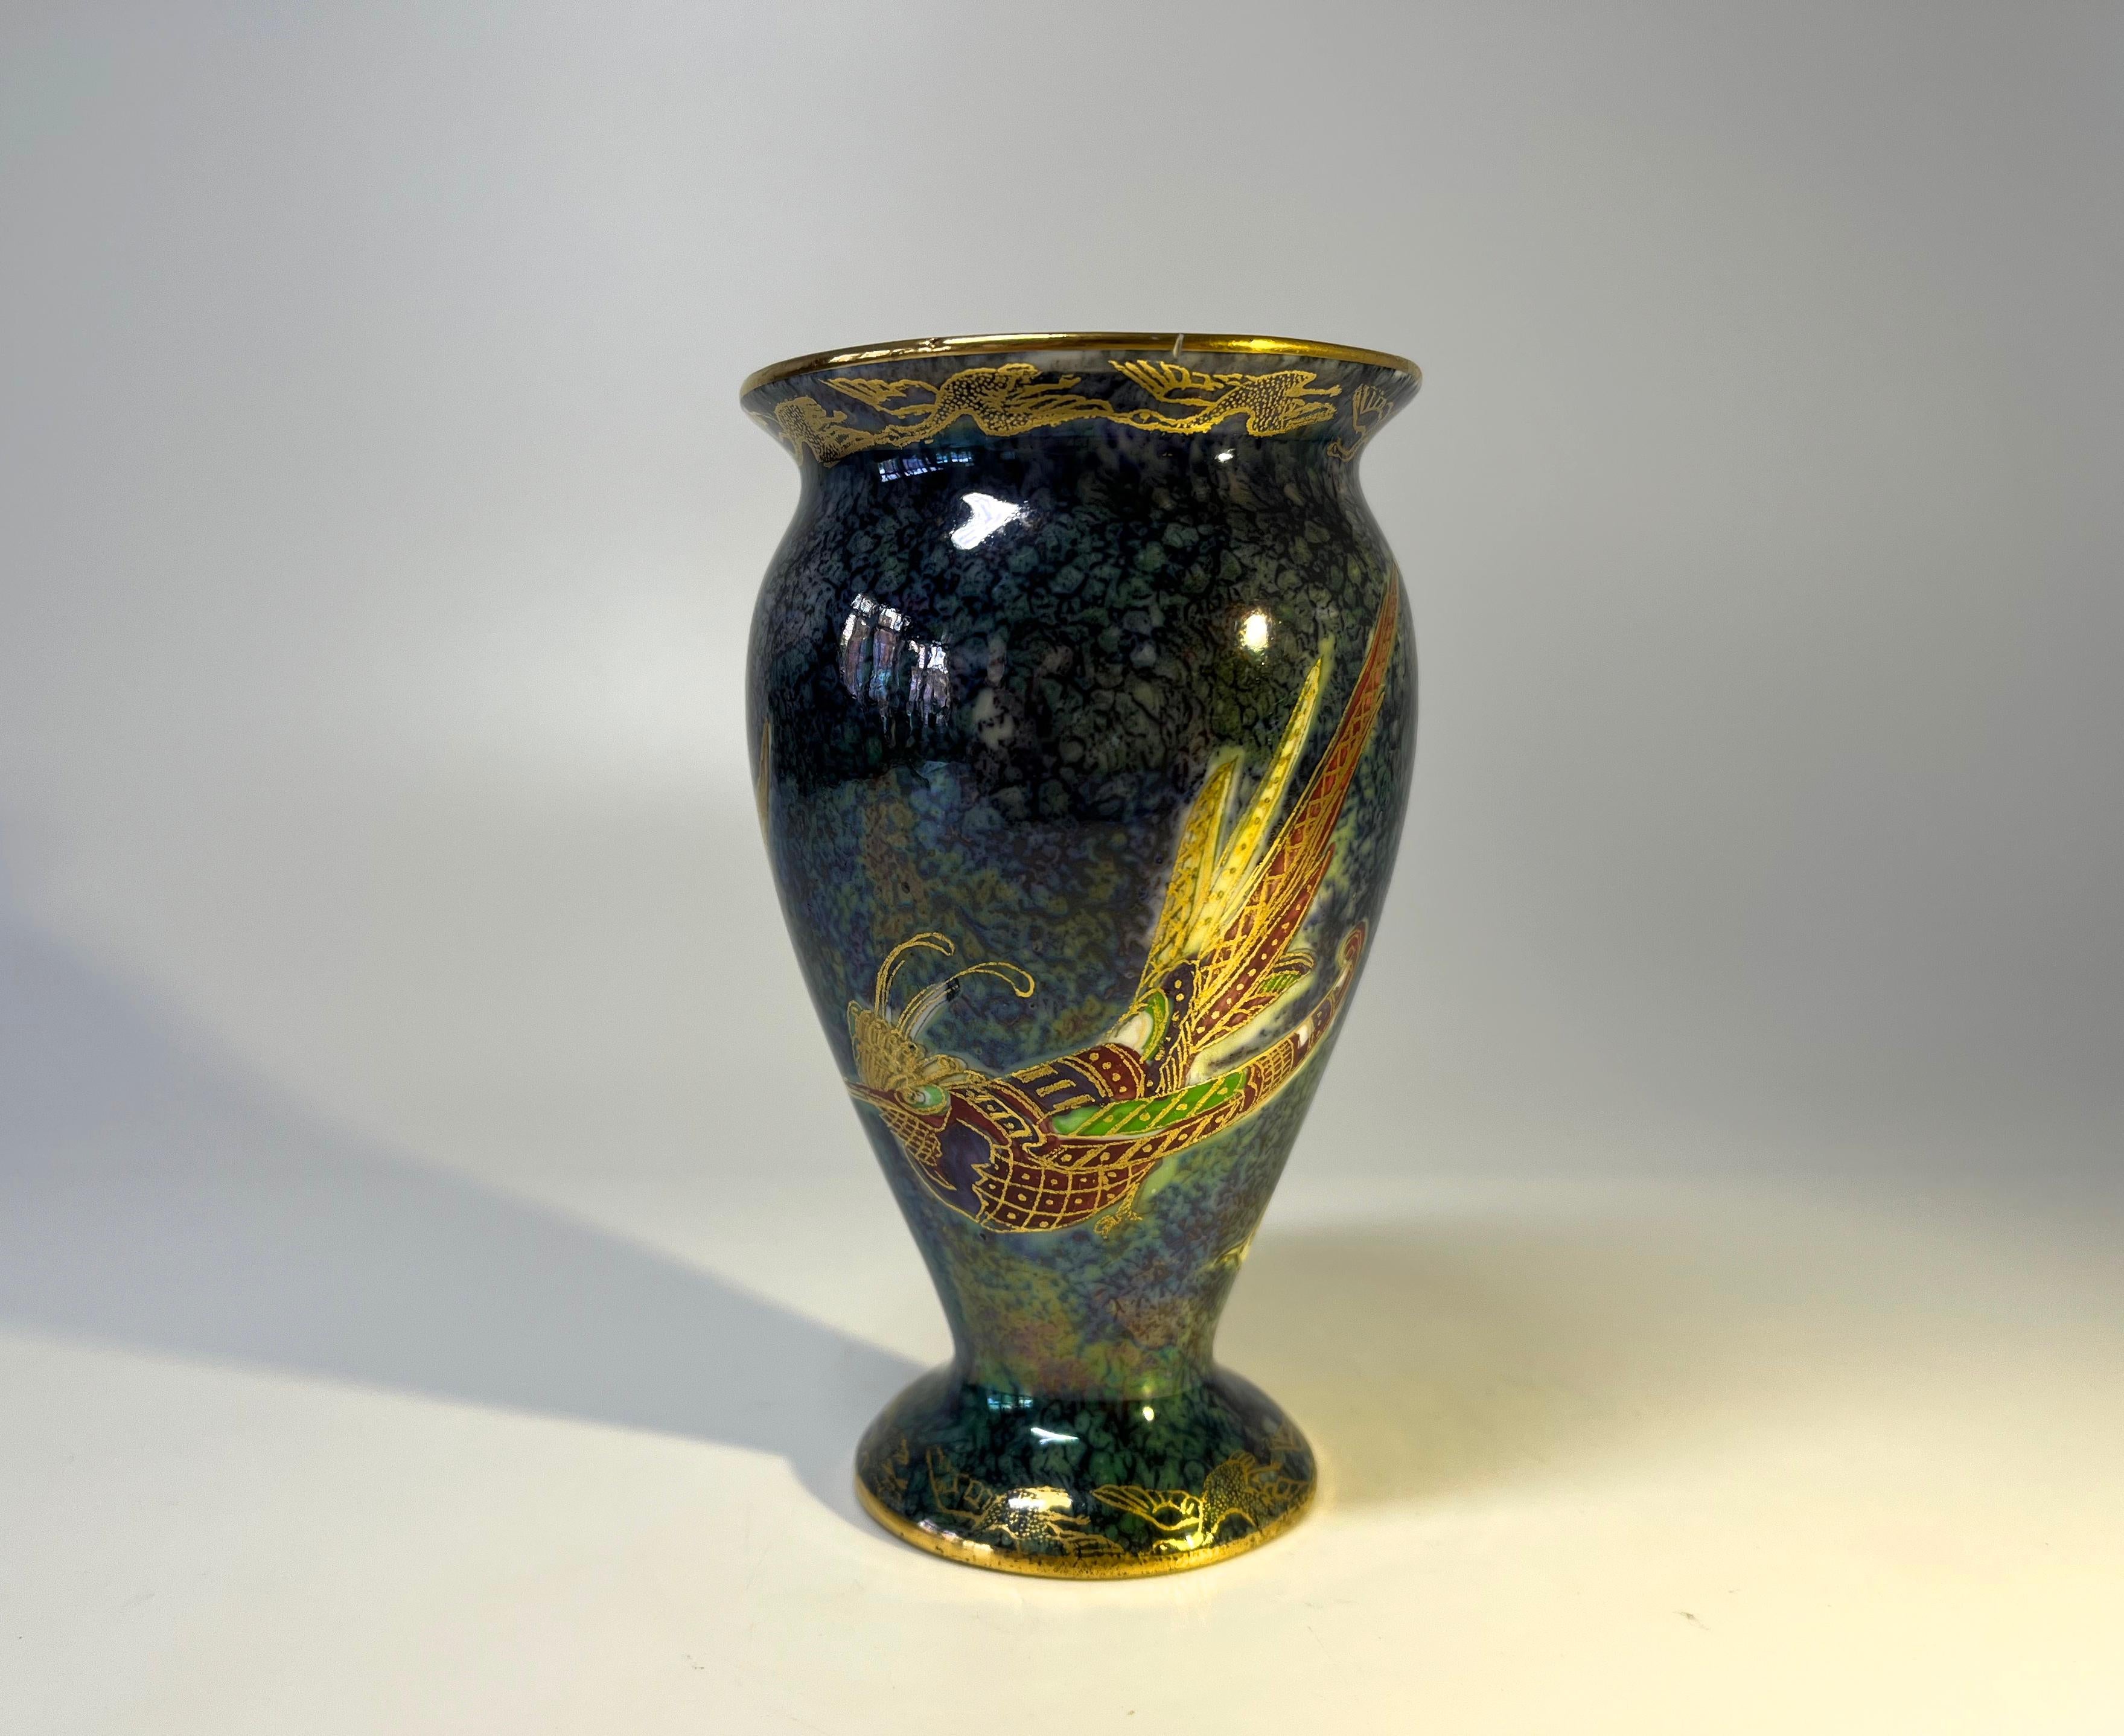 Fine quality Wedgwood porcelain baluster vase created by Daisy Makeig-Jones.
Rich and vibrant colours and gilding excel on this piece of highly collectible lustre Wedgwood
Decorated with exotic birds on an intriguing dark blue green